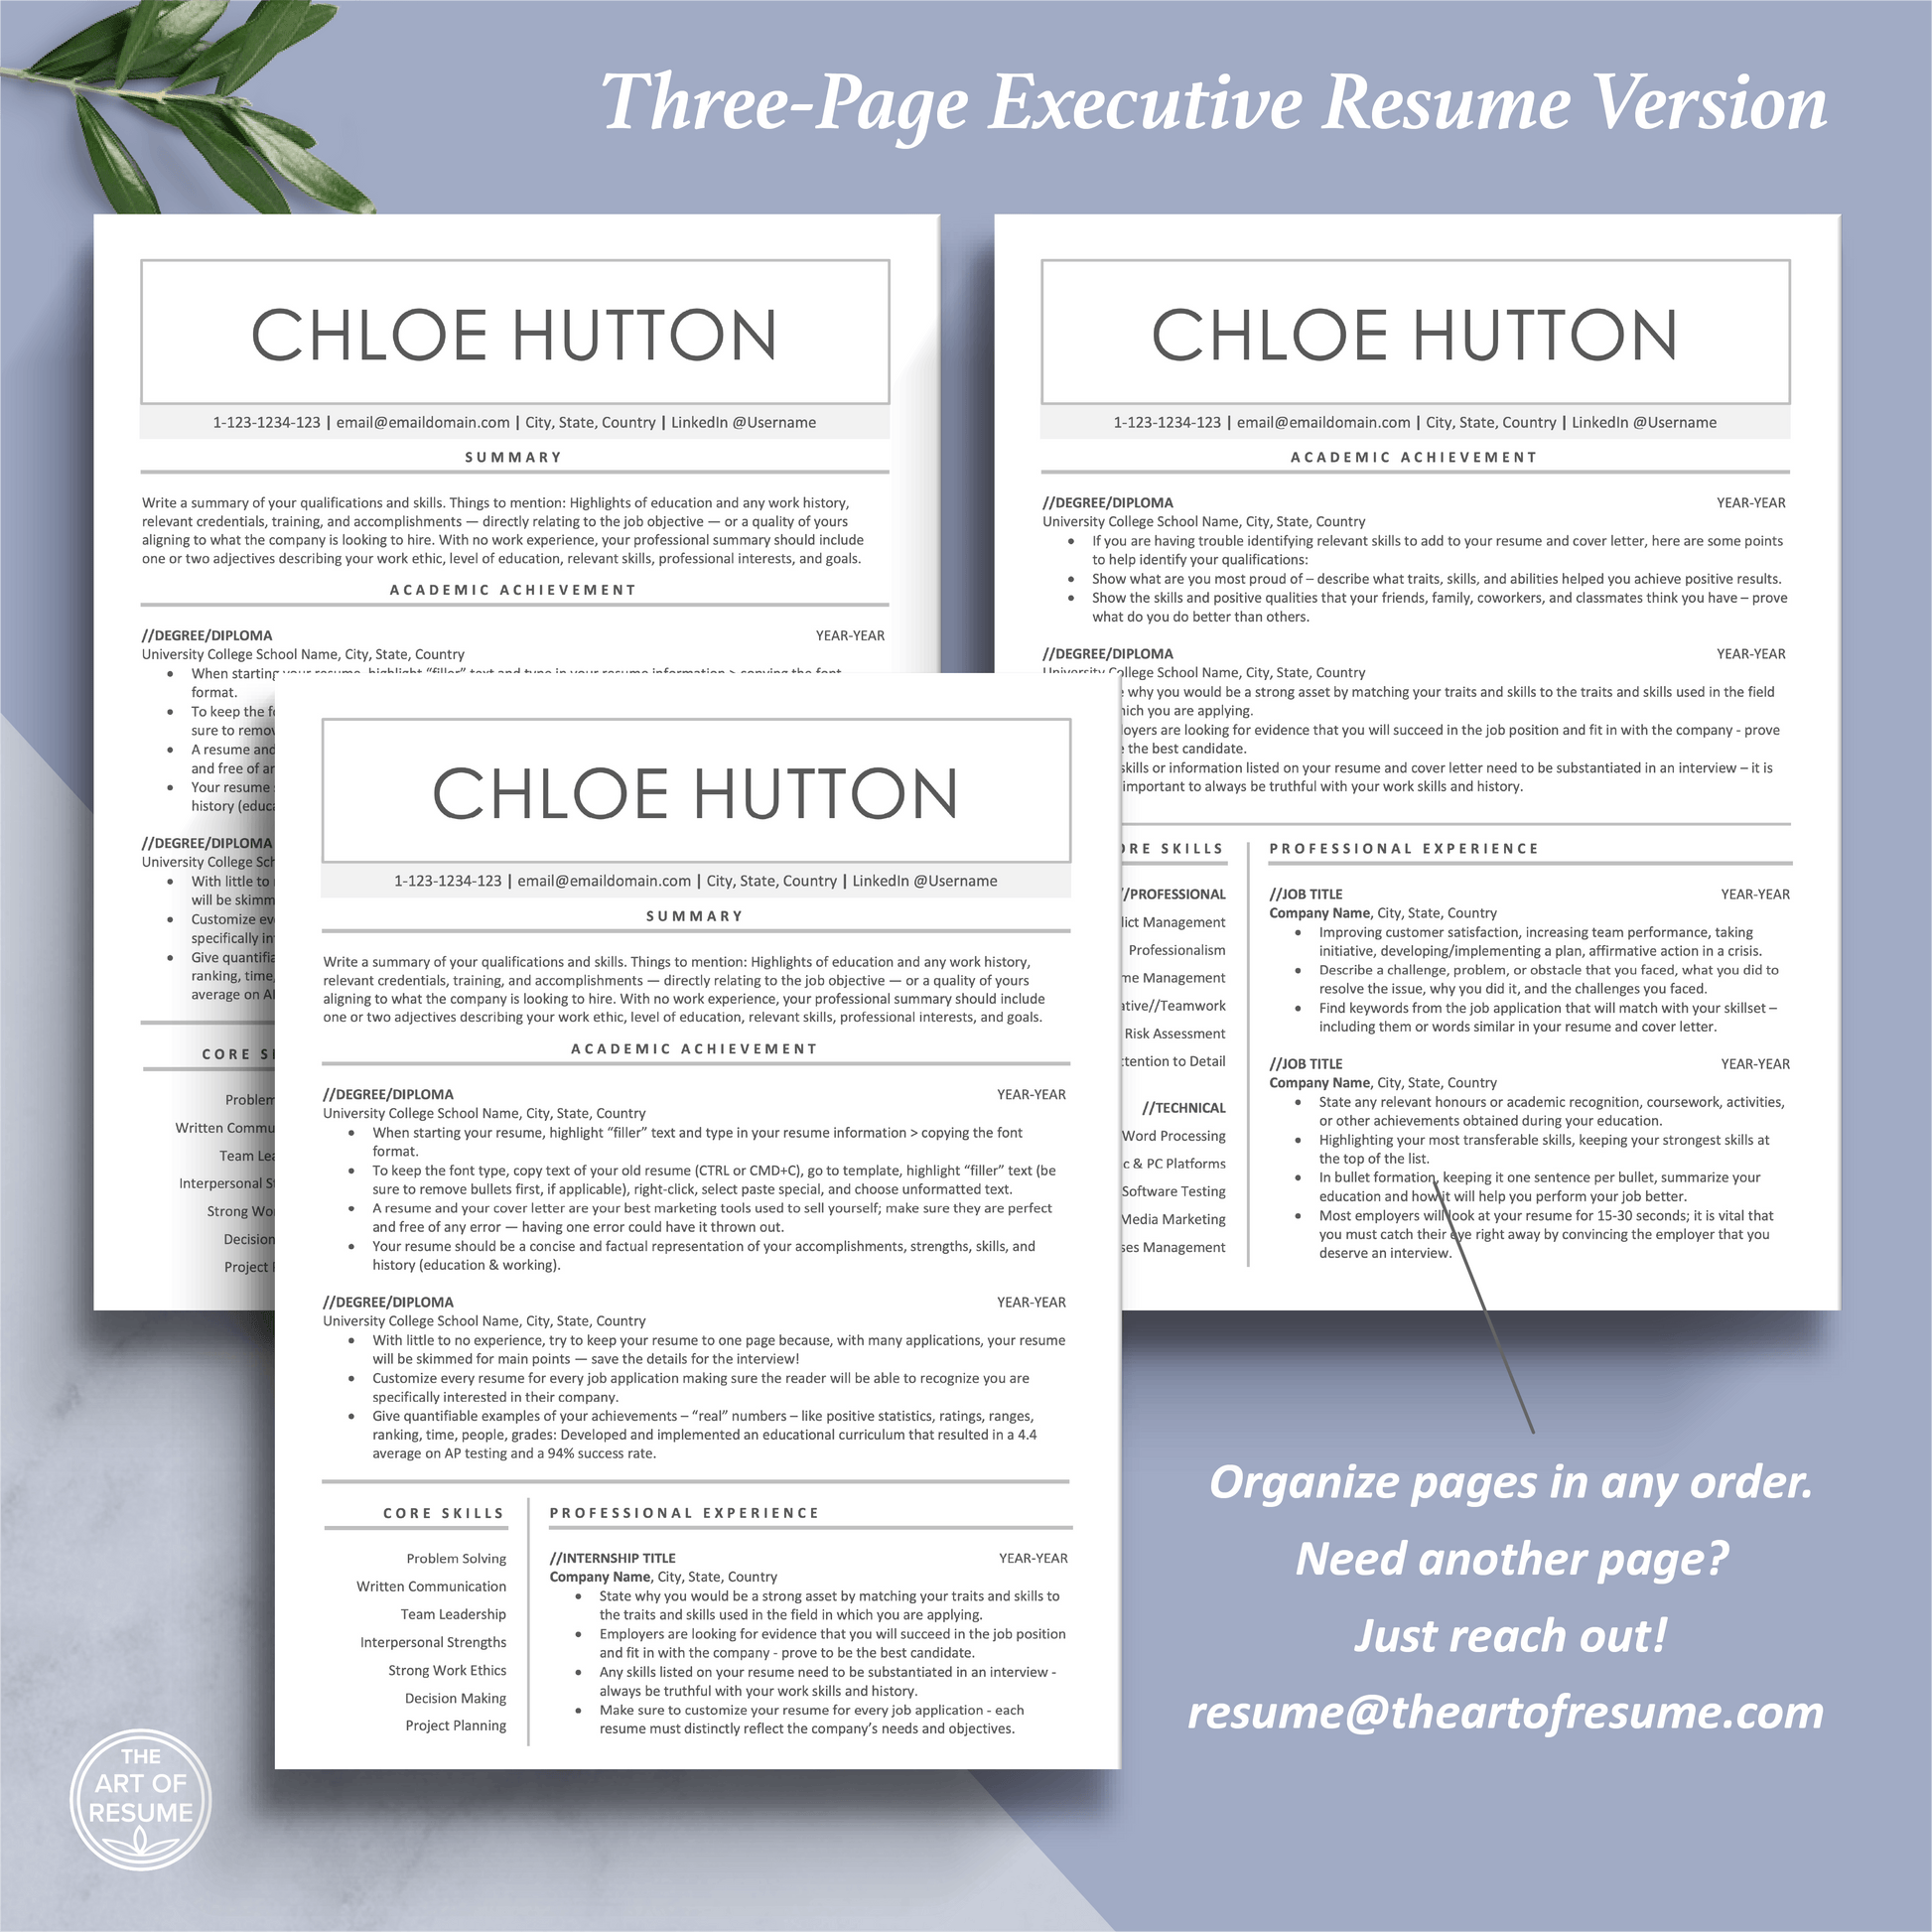 The Art of Resume Template | Three-Page Executive C-Suite Resume CV Format